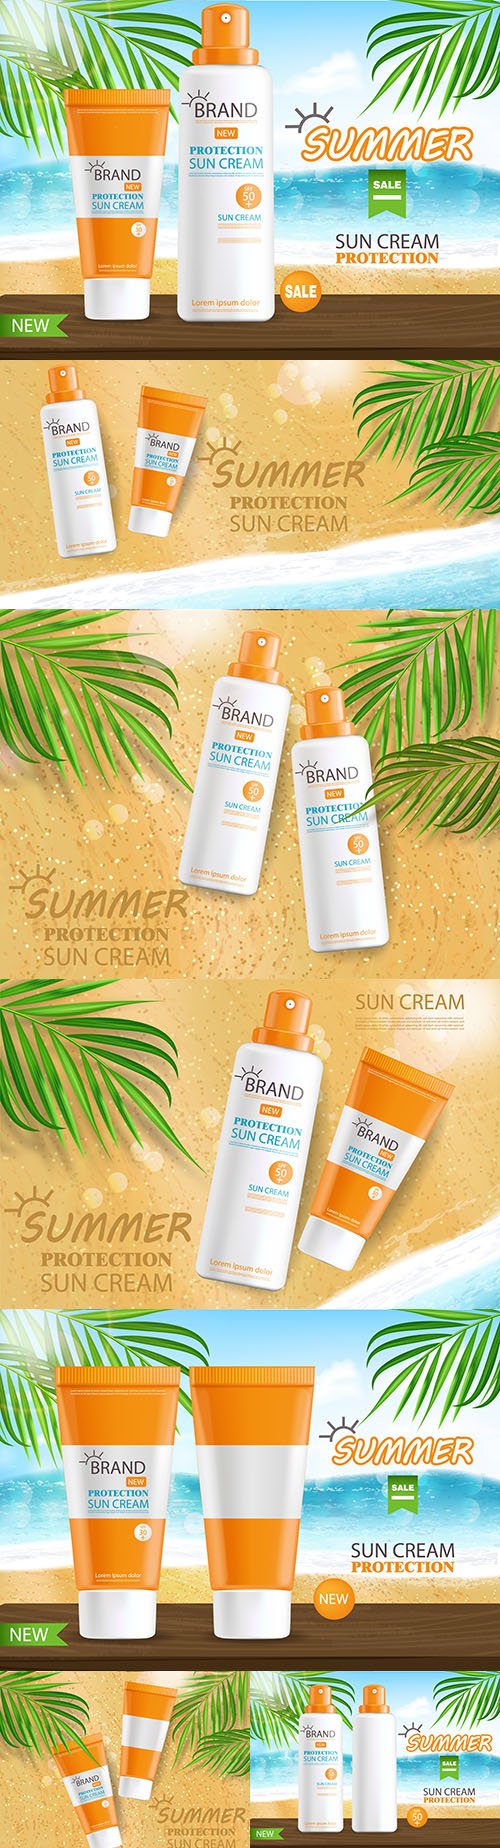 Sunscreen and tropical banner summer cosmetics